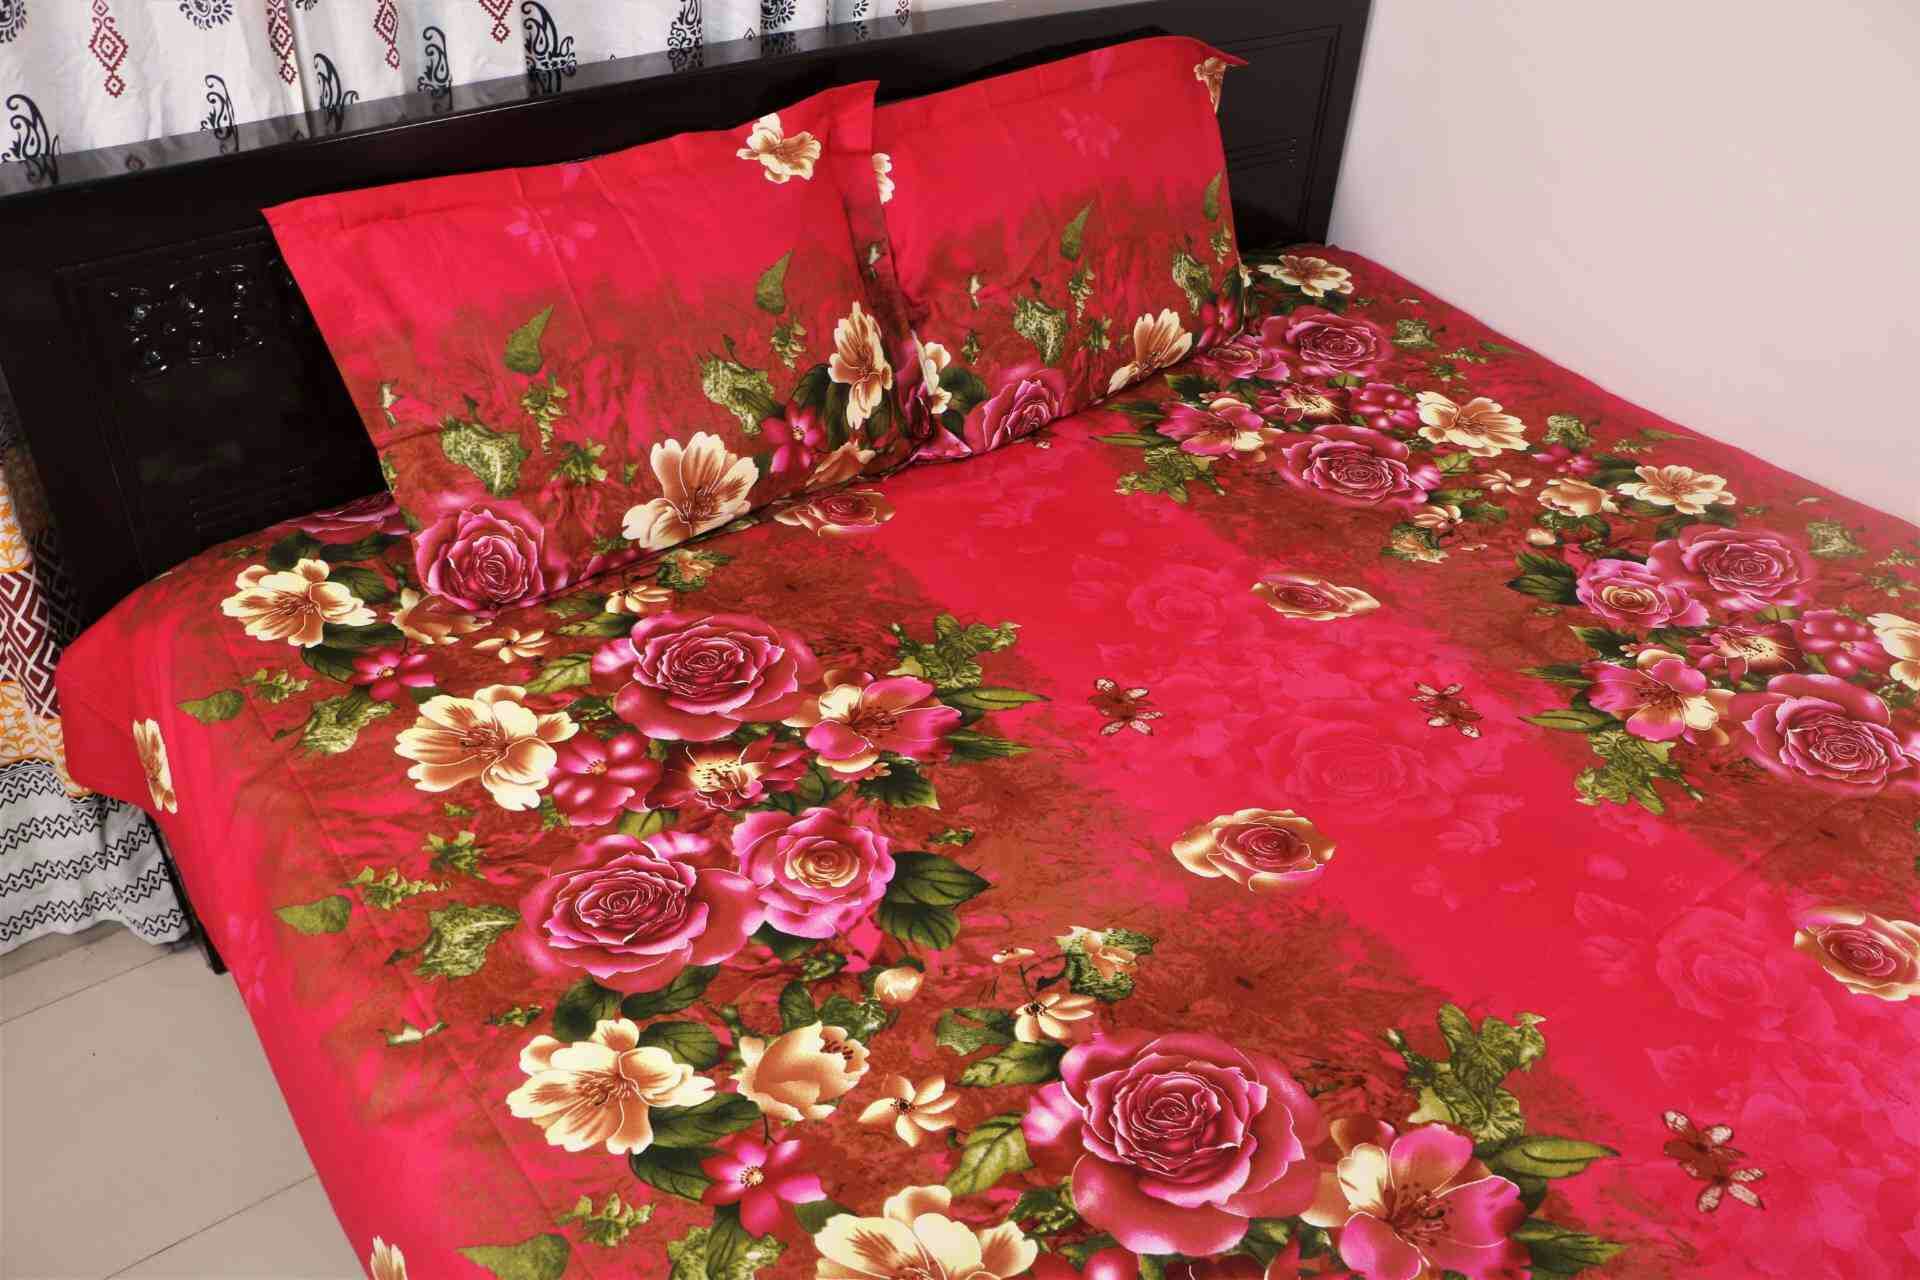 100% Cotton King Size Bedsheet New Collection  (৩ পিসের সেট)